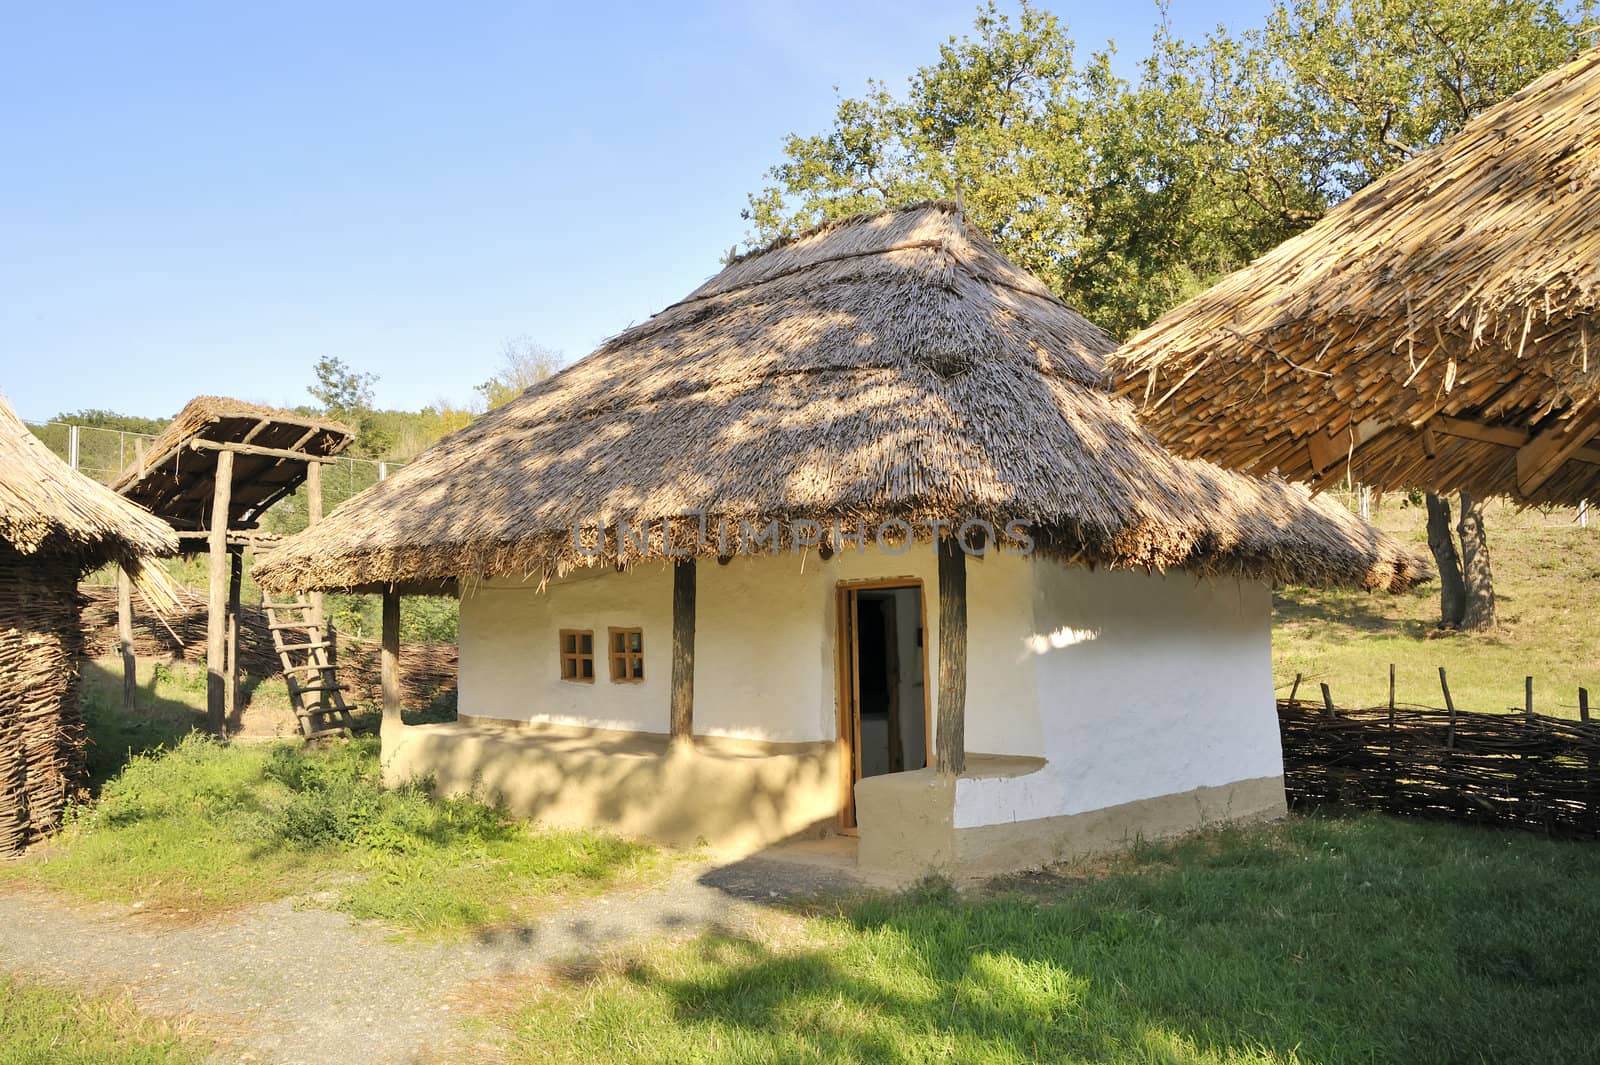 traditional  rural cottage with a straw roof